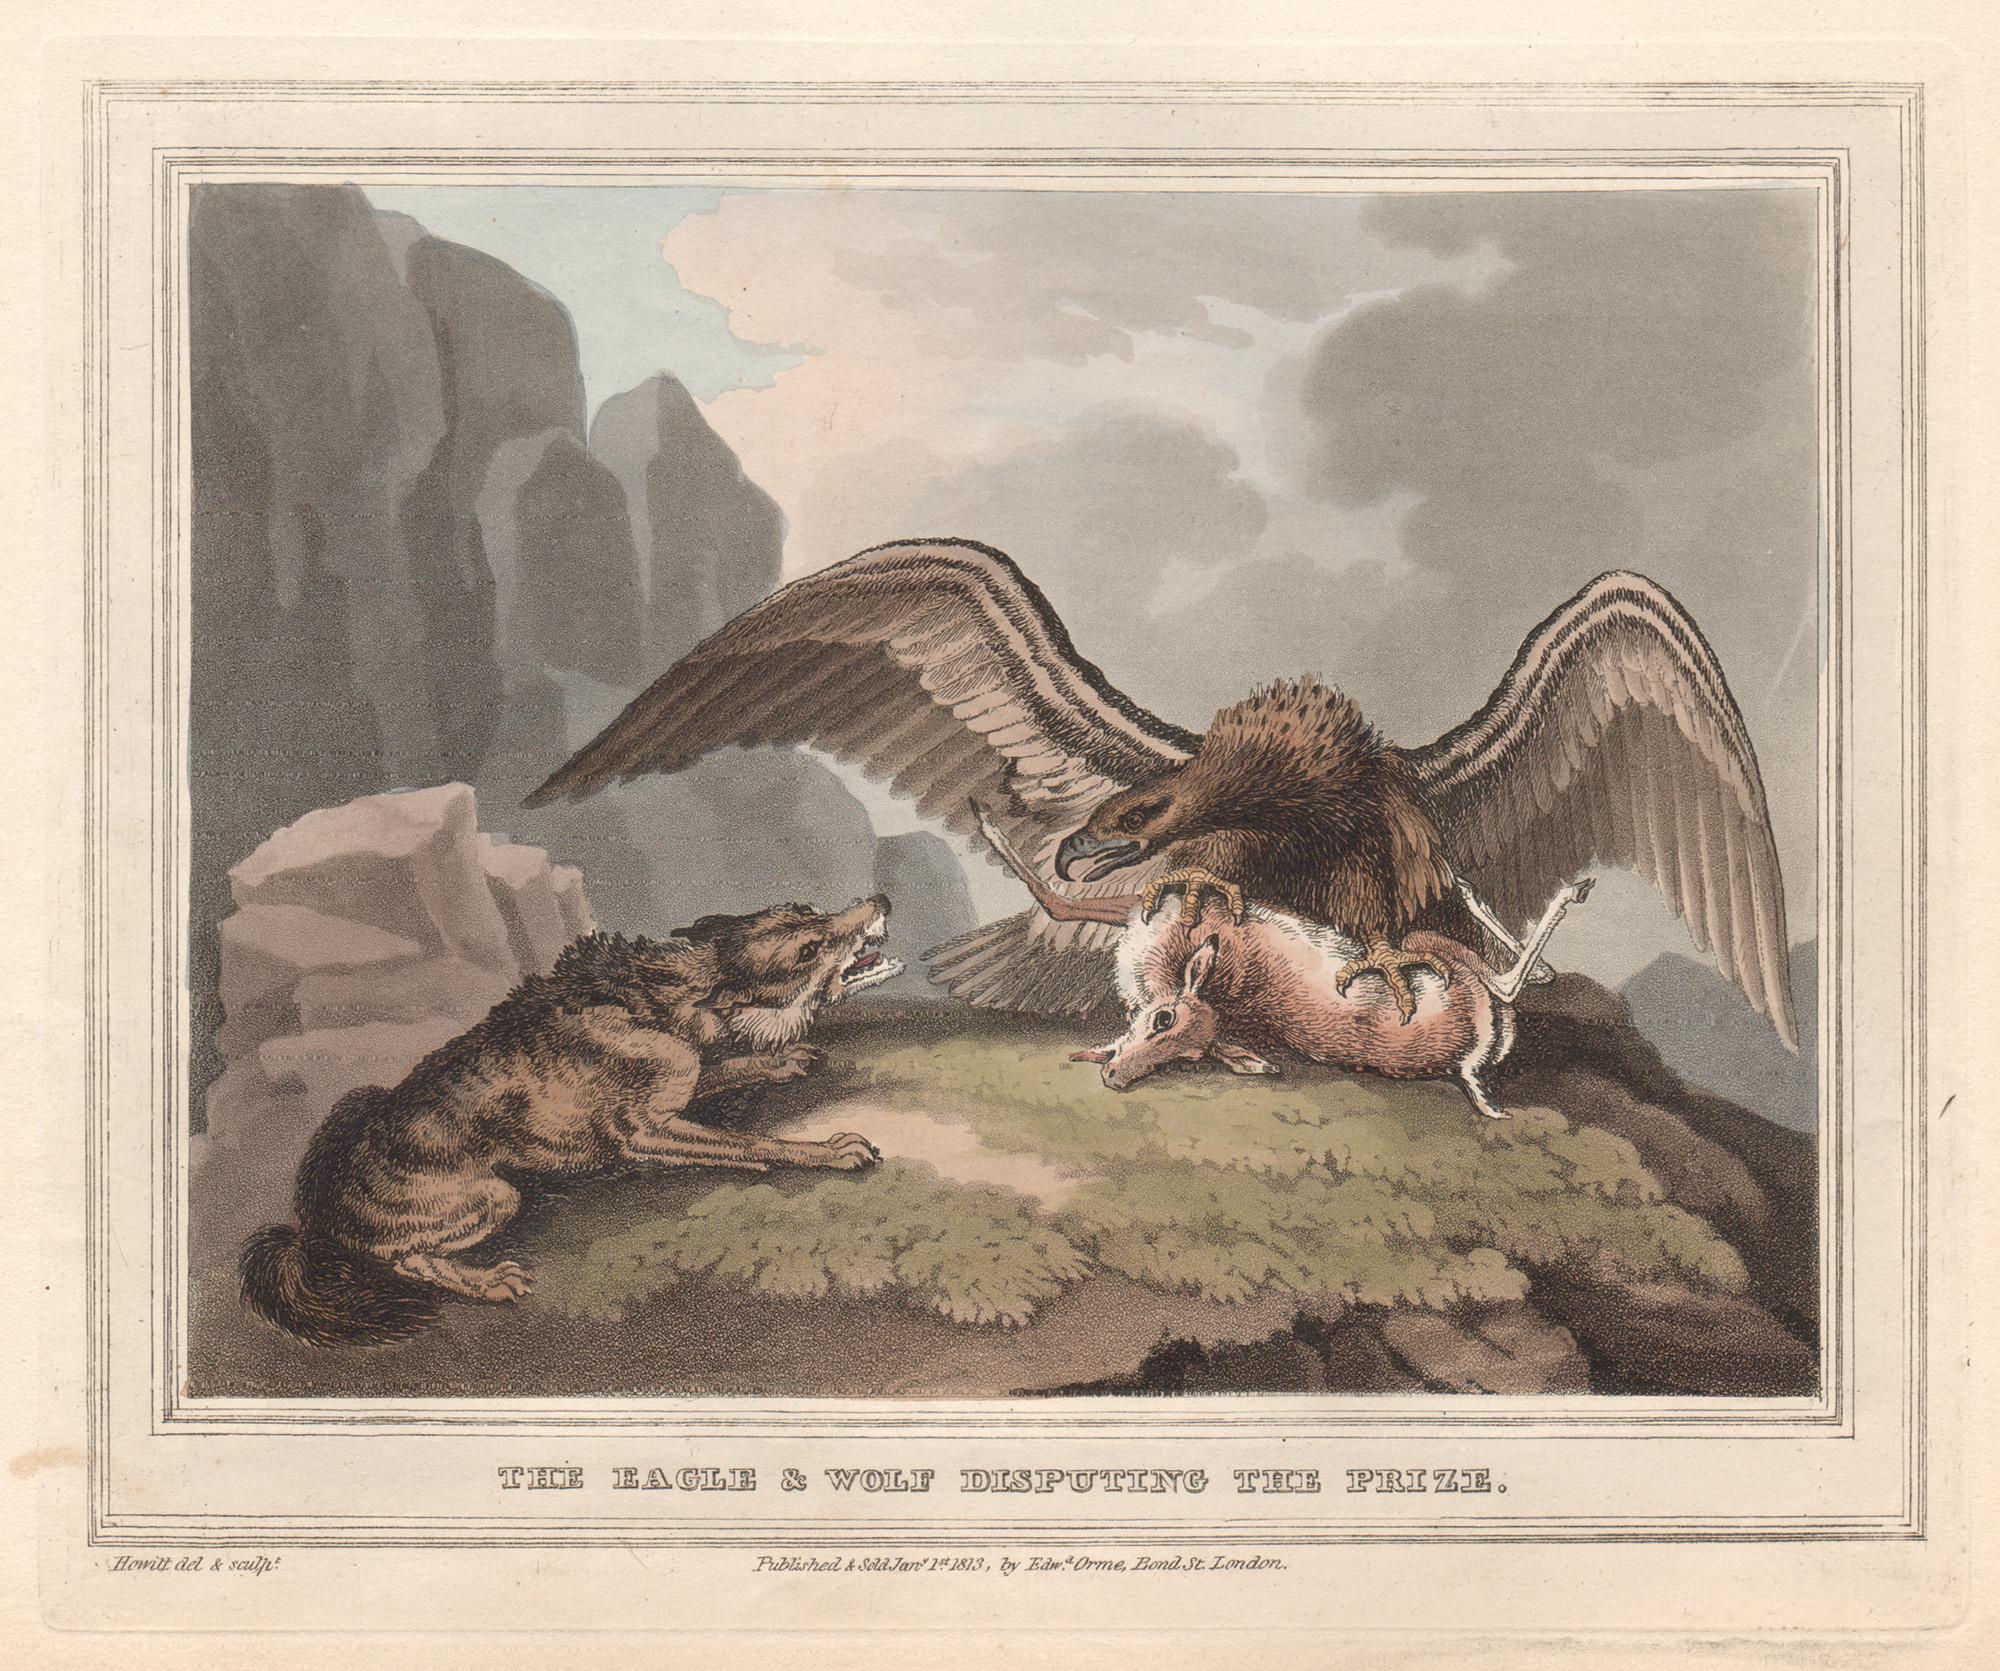 The Eagle & Wolf Disputing the Prize, aquatint engraving hunting print, 1813